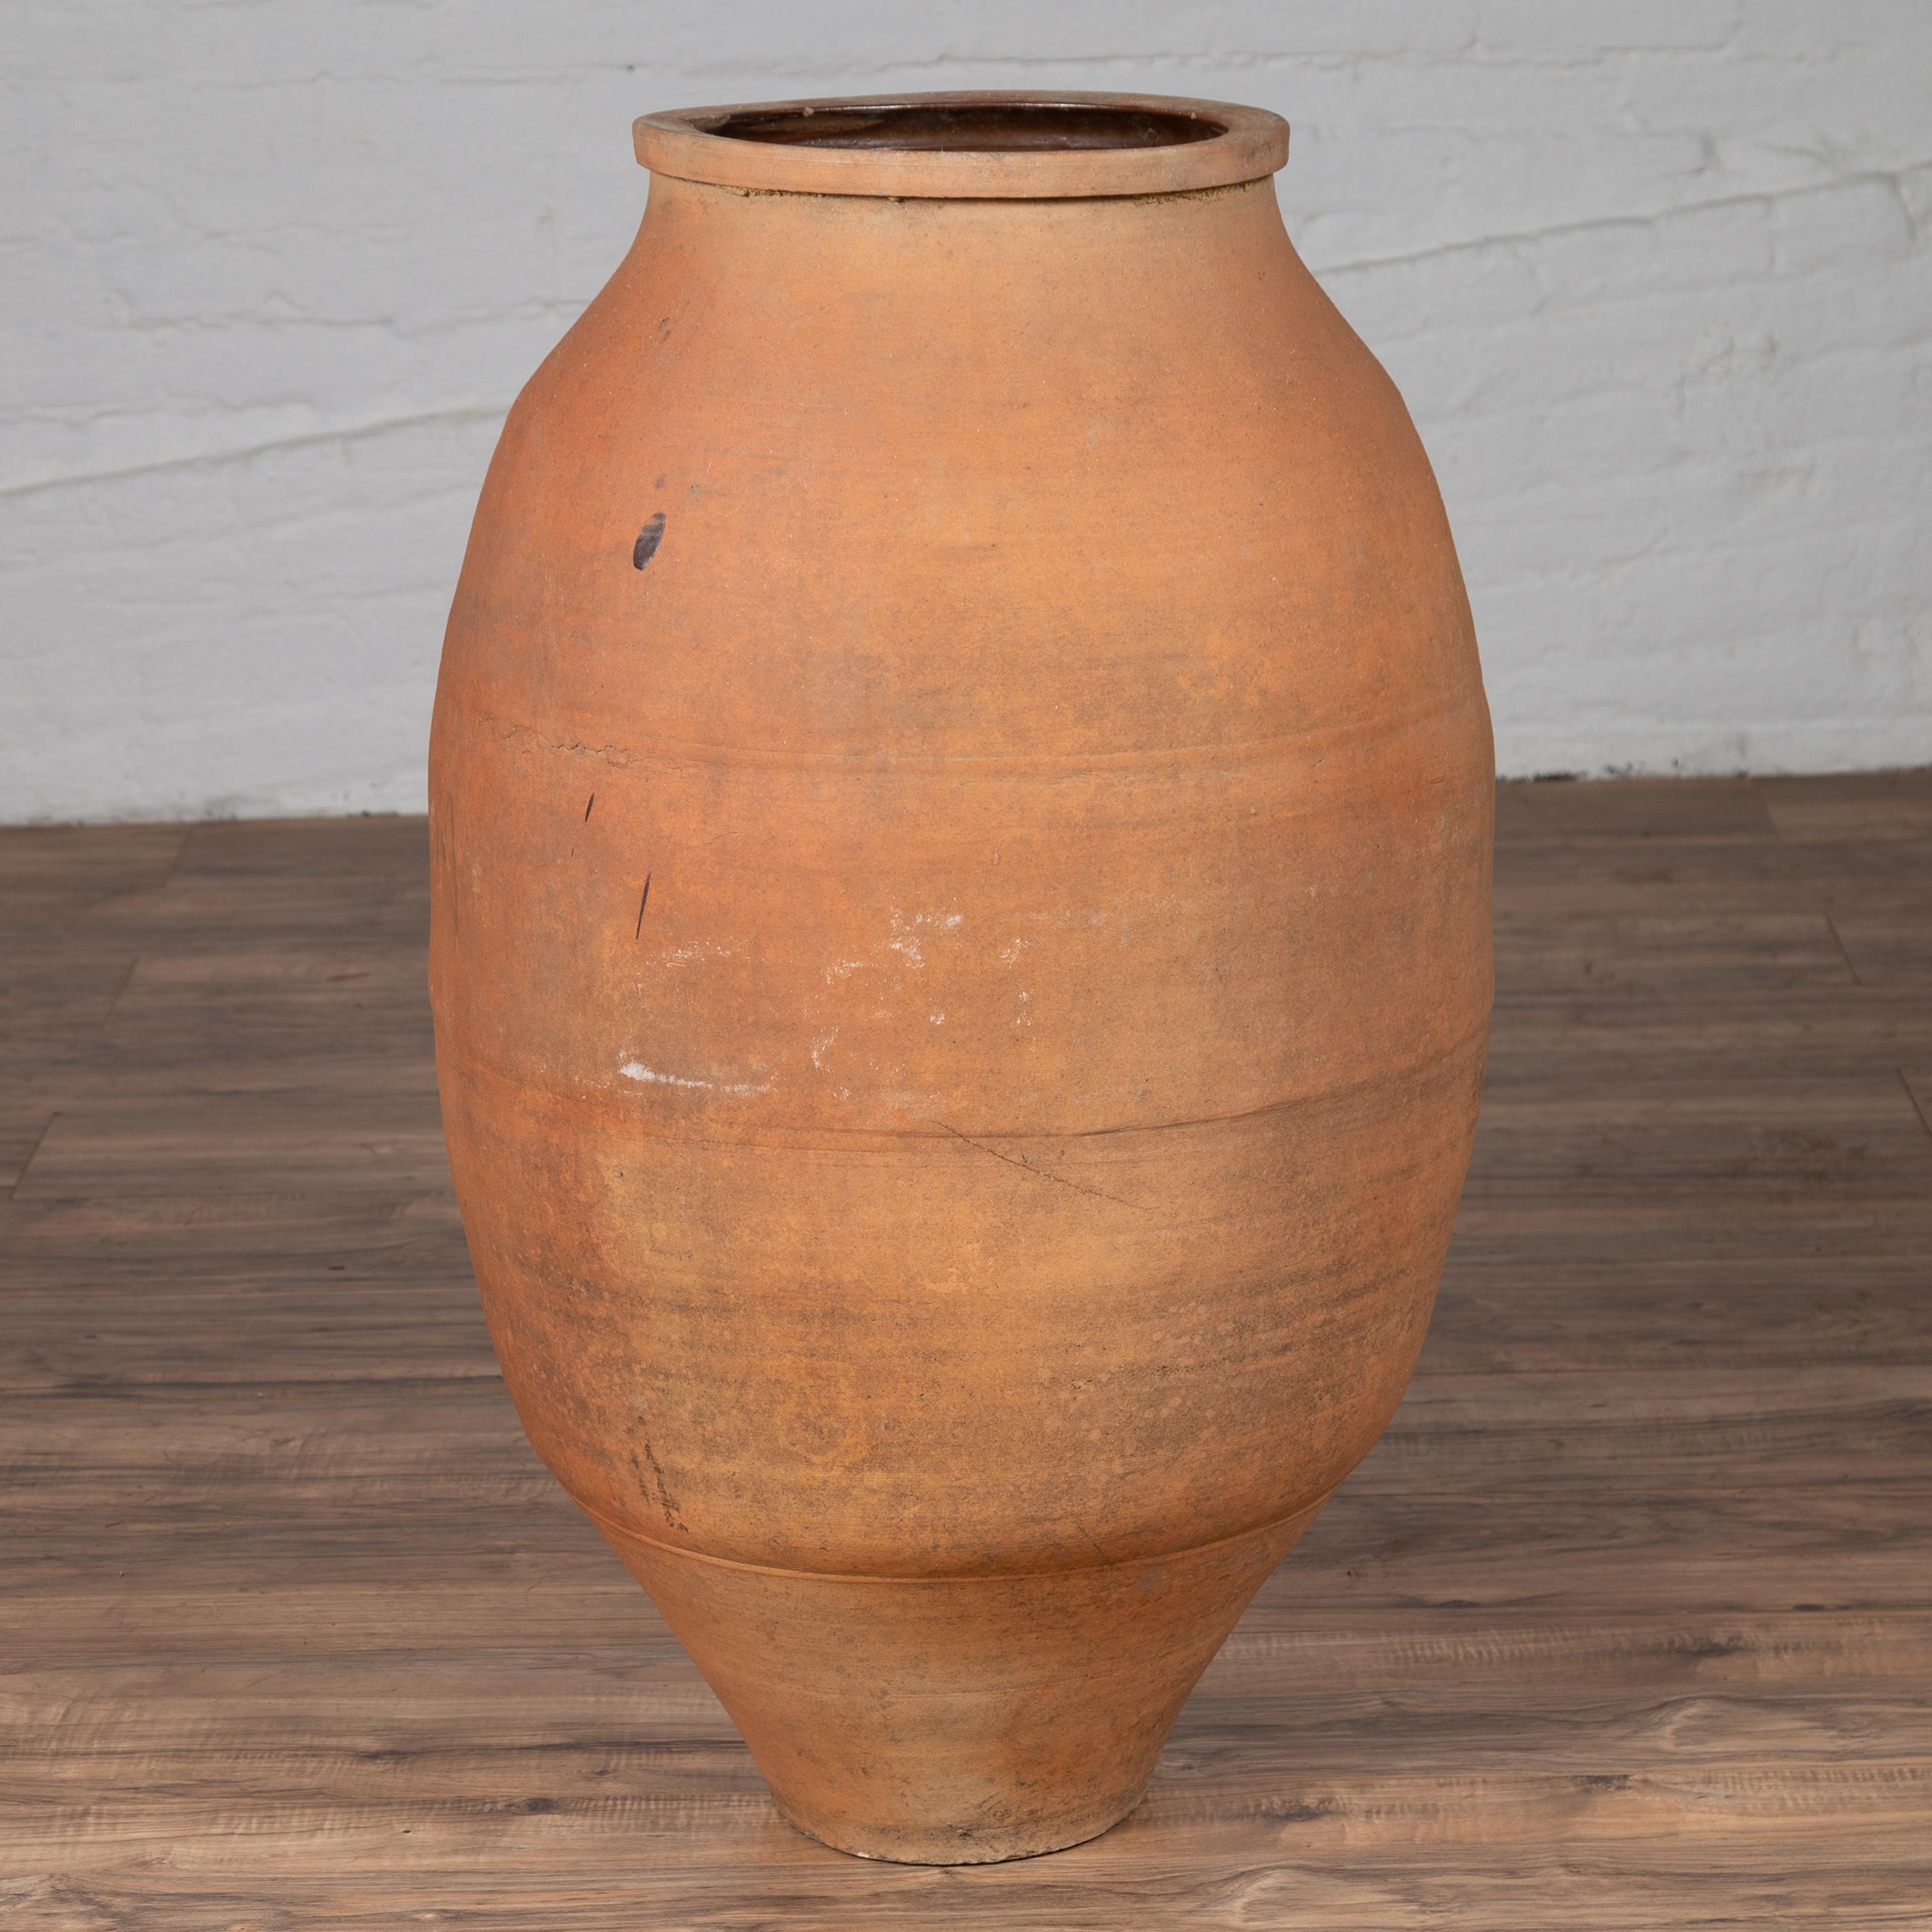 A tall antique Japanese Shigaraki stoneware grain storage urn from the early 20th century with warm patina. Born in one of the six ancient kilns of Japan, this large Shigaraki urn is made of sandy clay typical of the region, and features a rounded